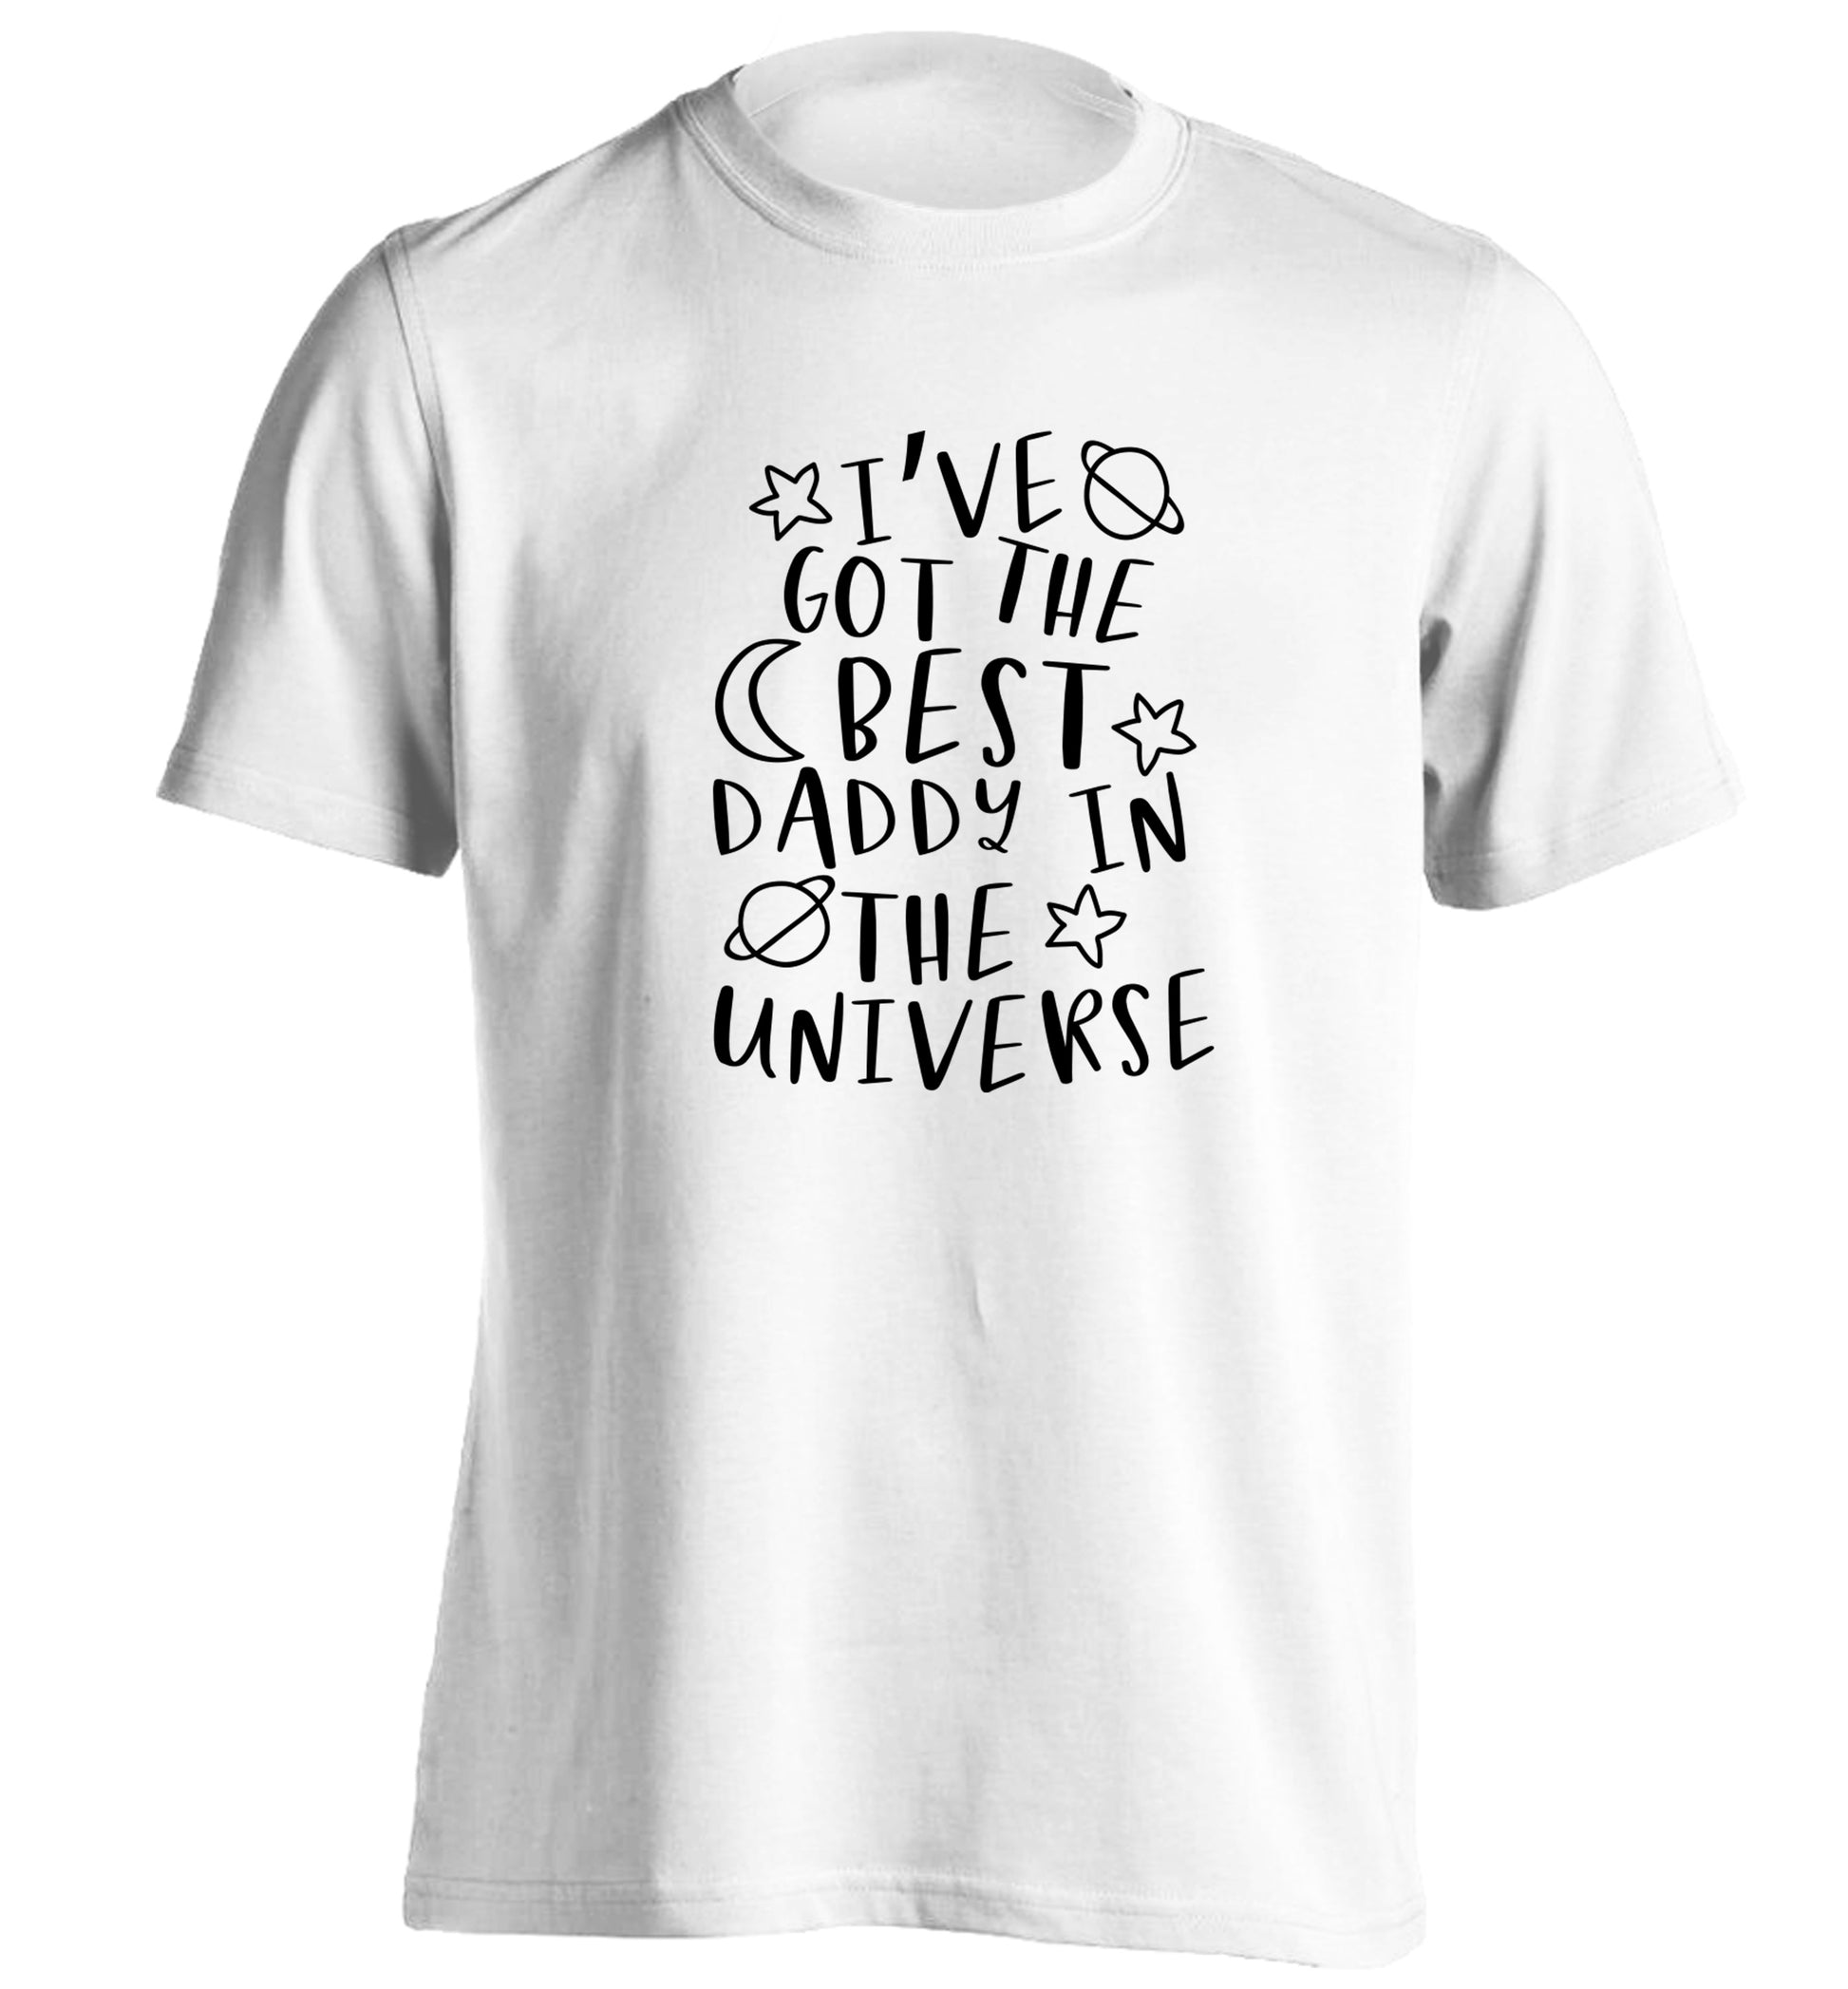 I've got the best daddy in the universe adults unisex white Tshirt 2XL